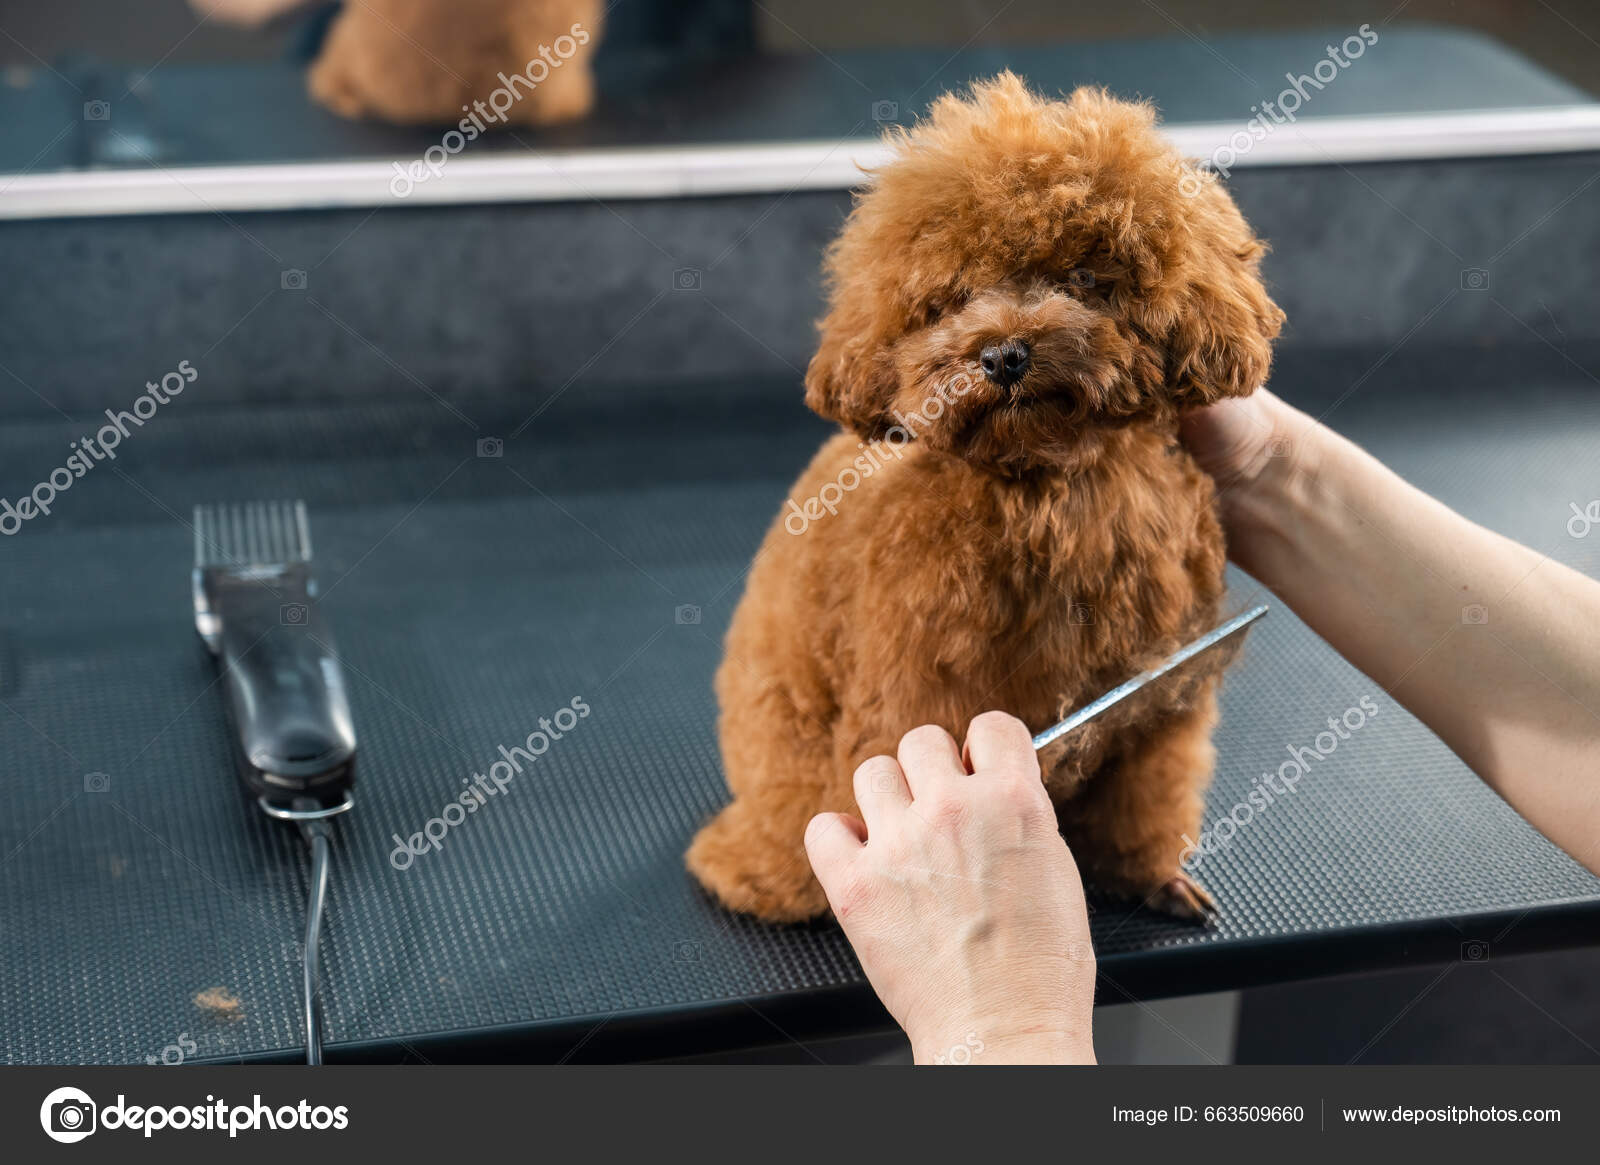 Dog Grooming Shears for Poodles (January 2024) - Magix Shears